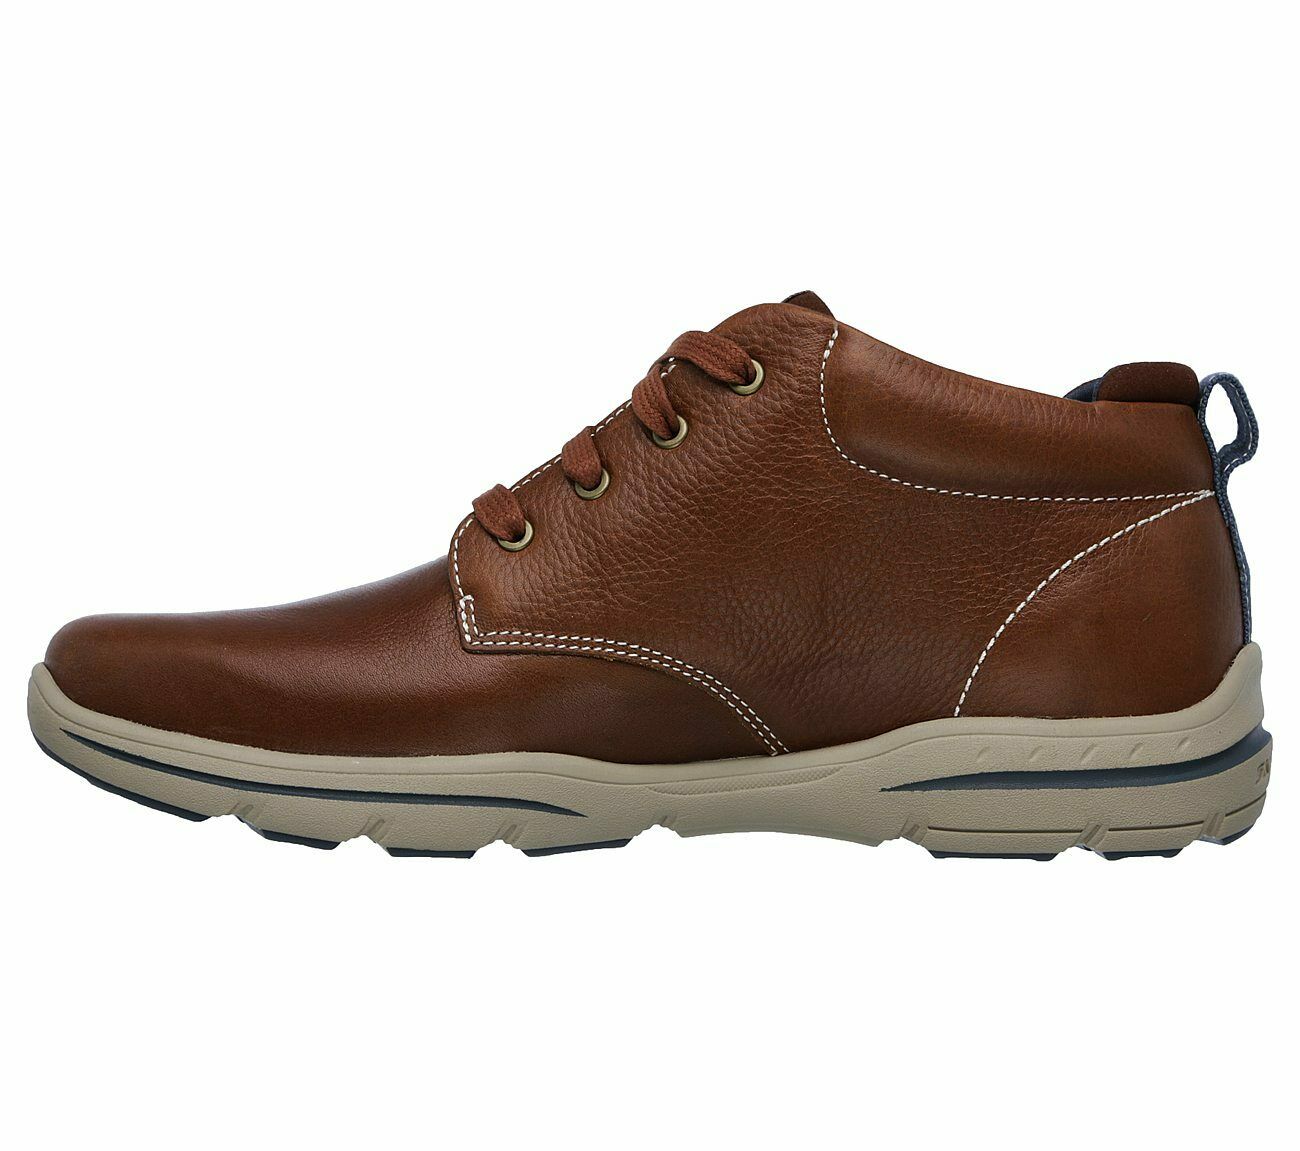 Mens Skechers Harper-Meldon Leather Casual Lace Up Ankle Boots Sizes 6 ...